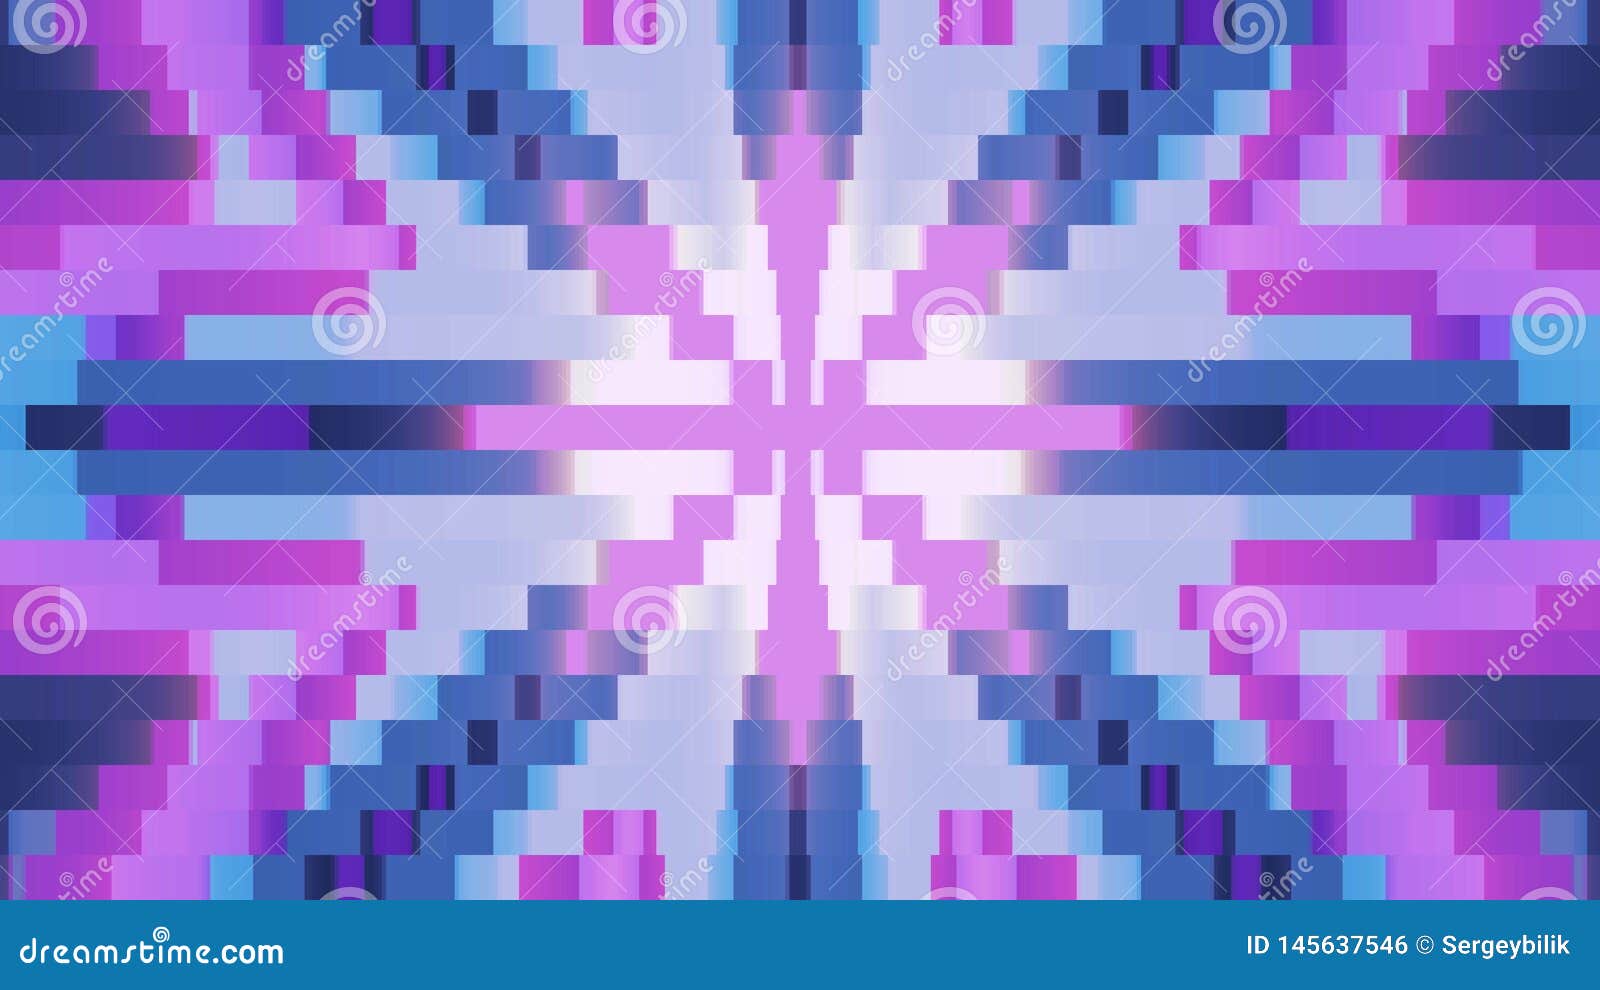 Abstract Pixel Block Moving Seamless Loop Background Animation 42 New  Quality Universal Motion Dynamic Animated Retro Stock Illustration -  Illustration of disco, colorful: 145637546